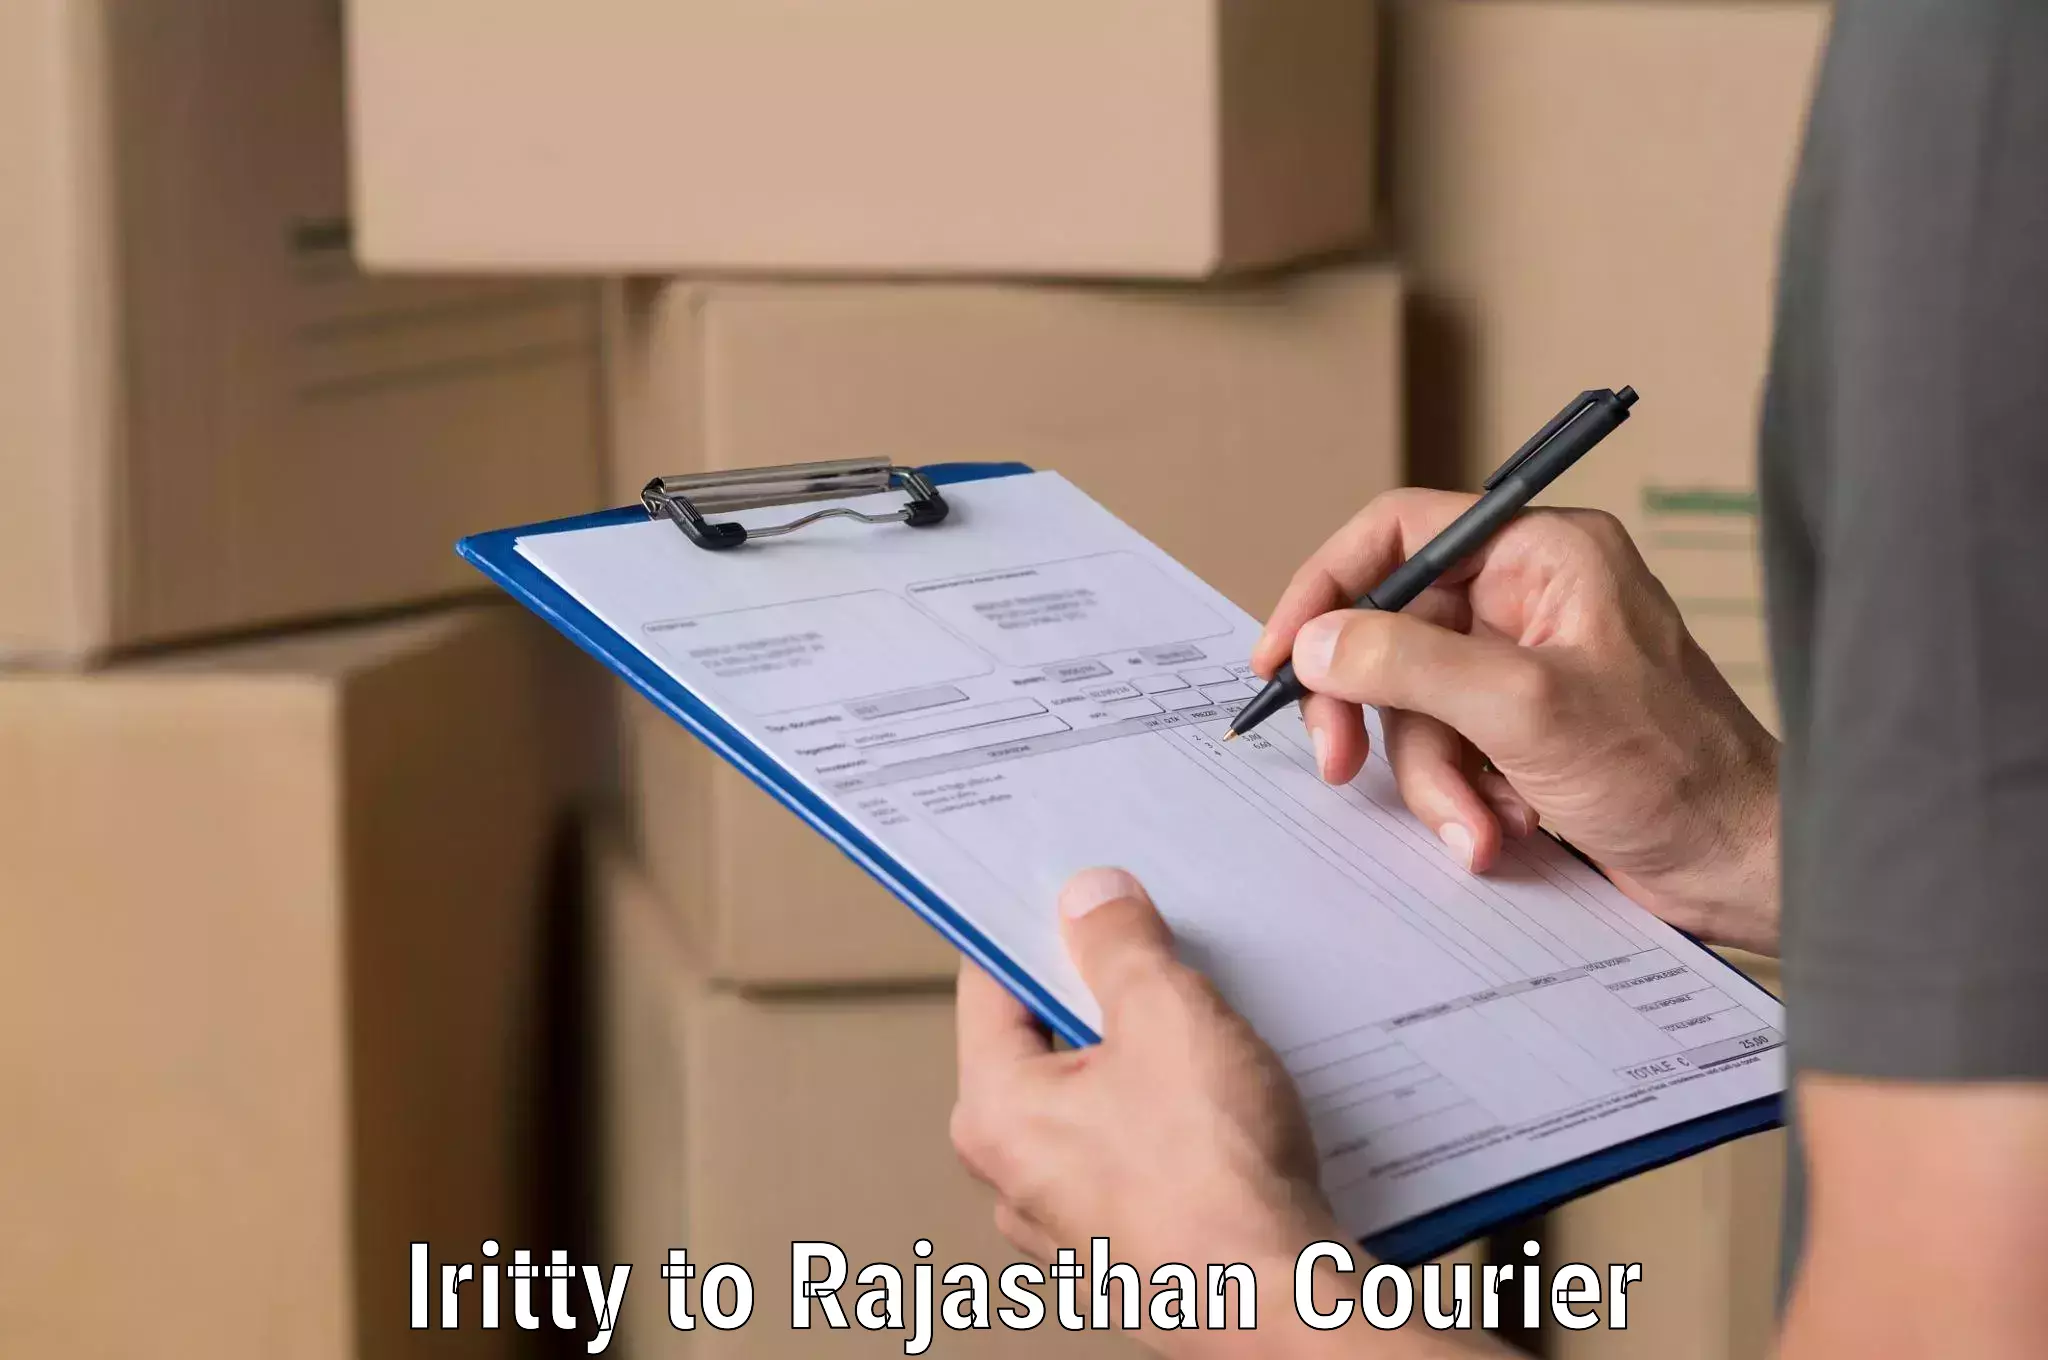 Global courier networks Iritty to Mahwa